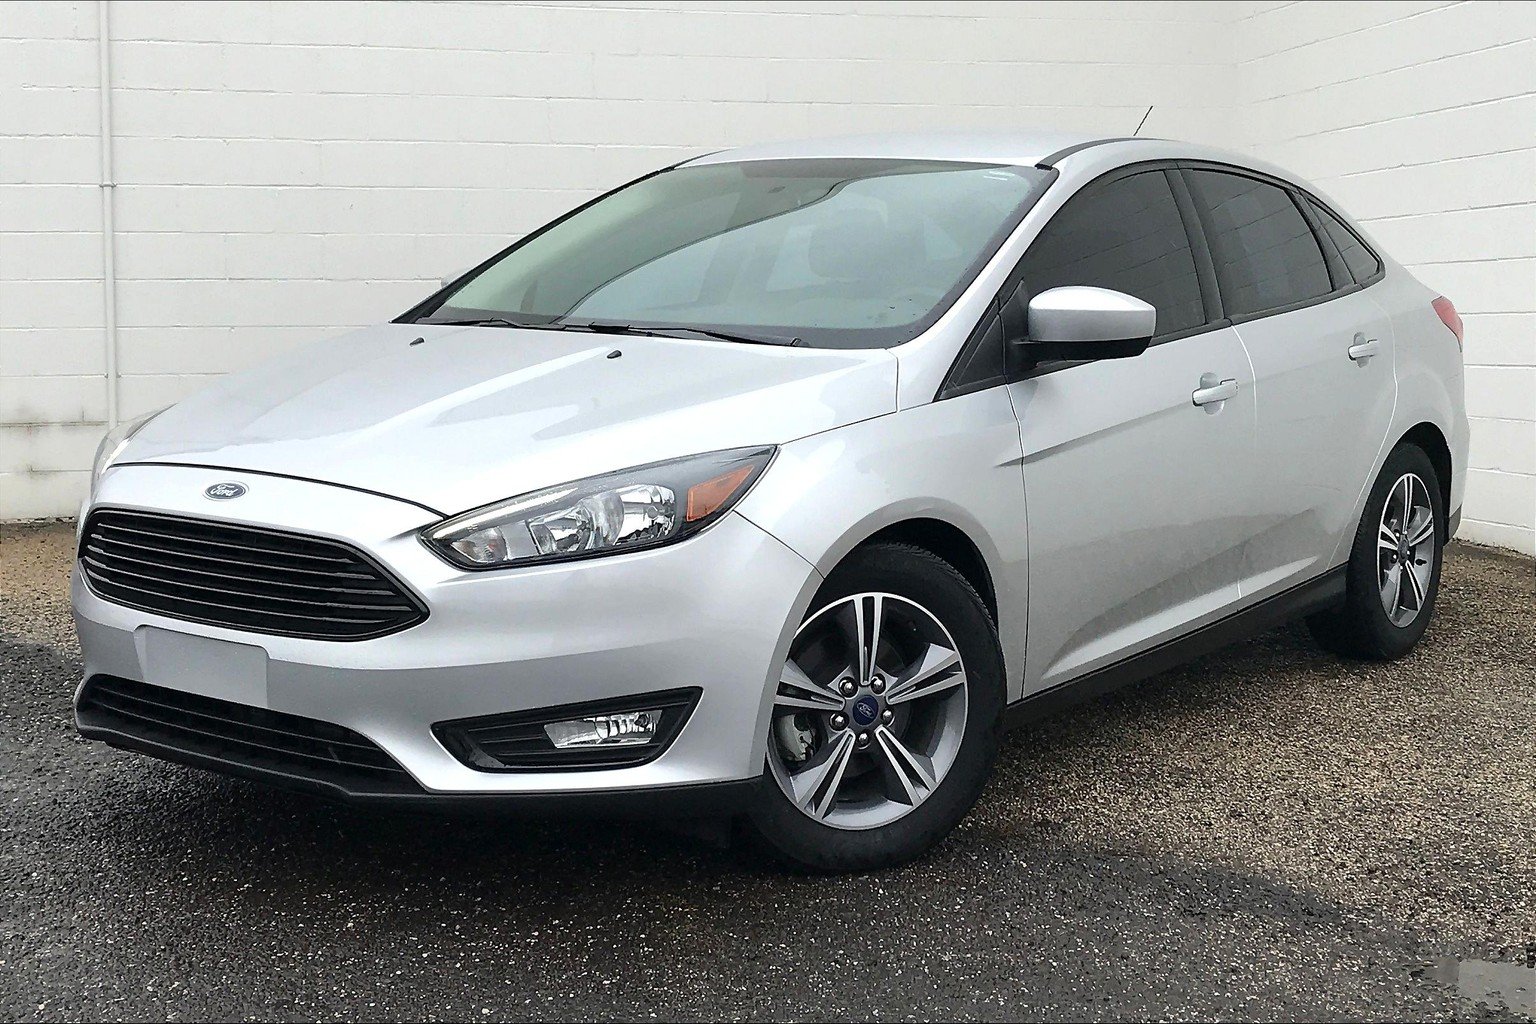 Pre-Owned 2018 Ford Focus SE 4D Sedan in Morton #203655 | Mike Murphy Ford